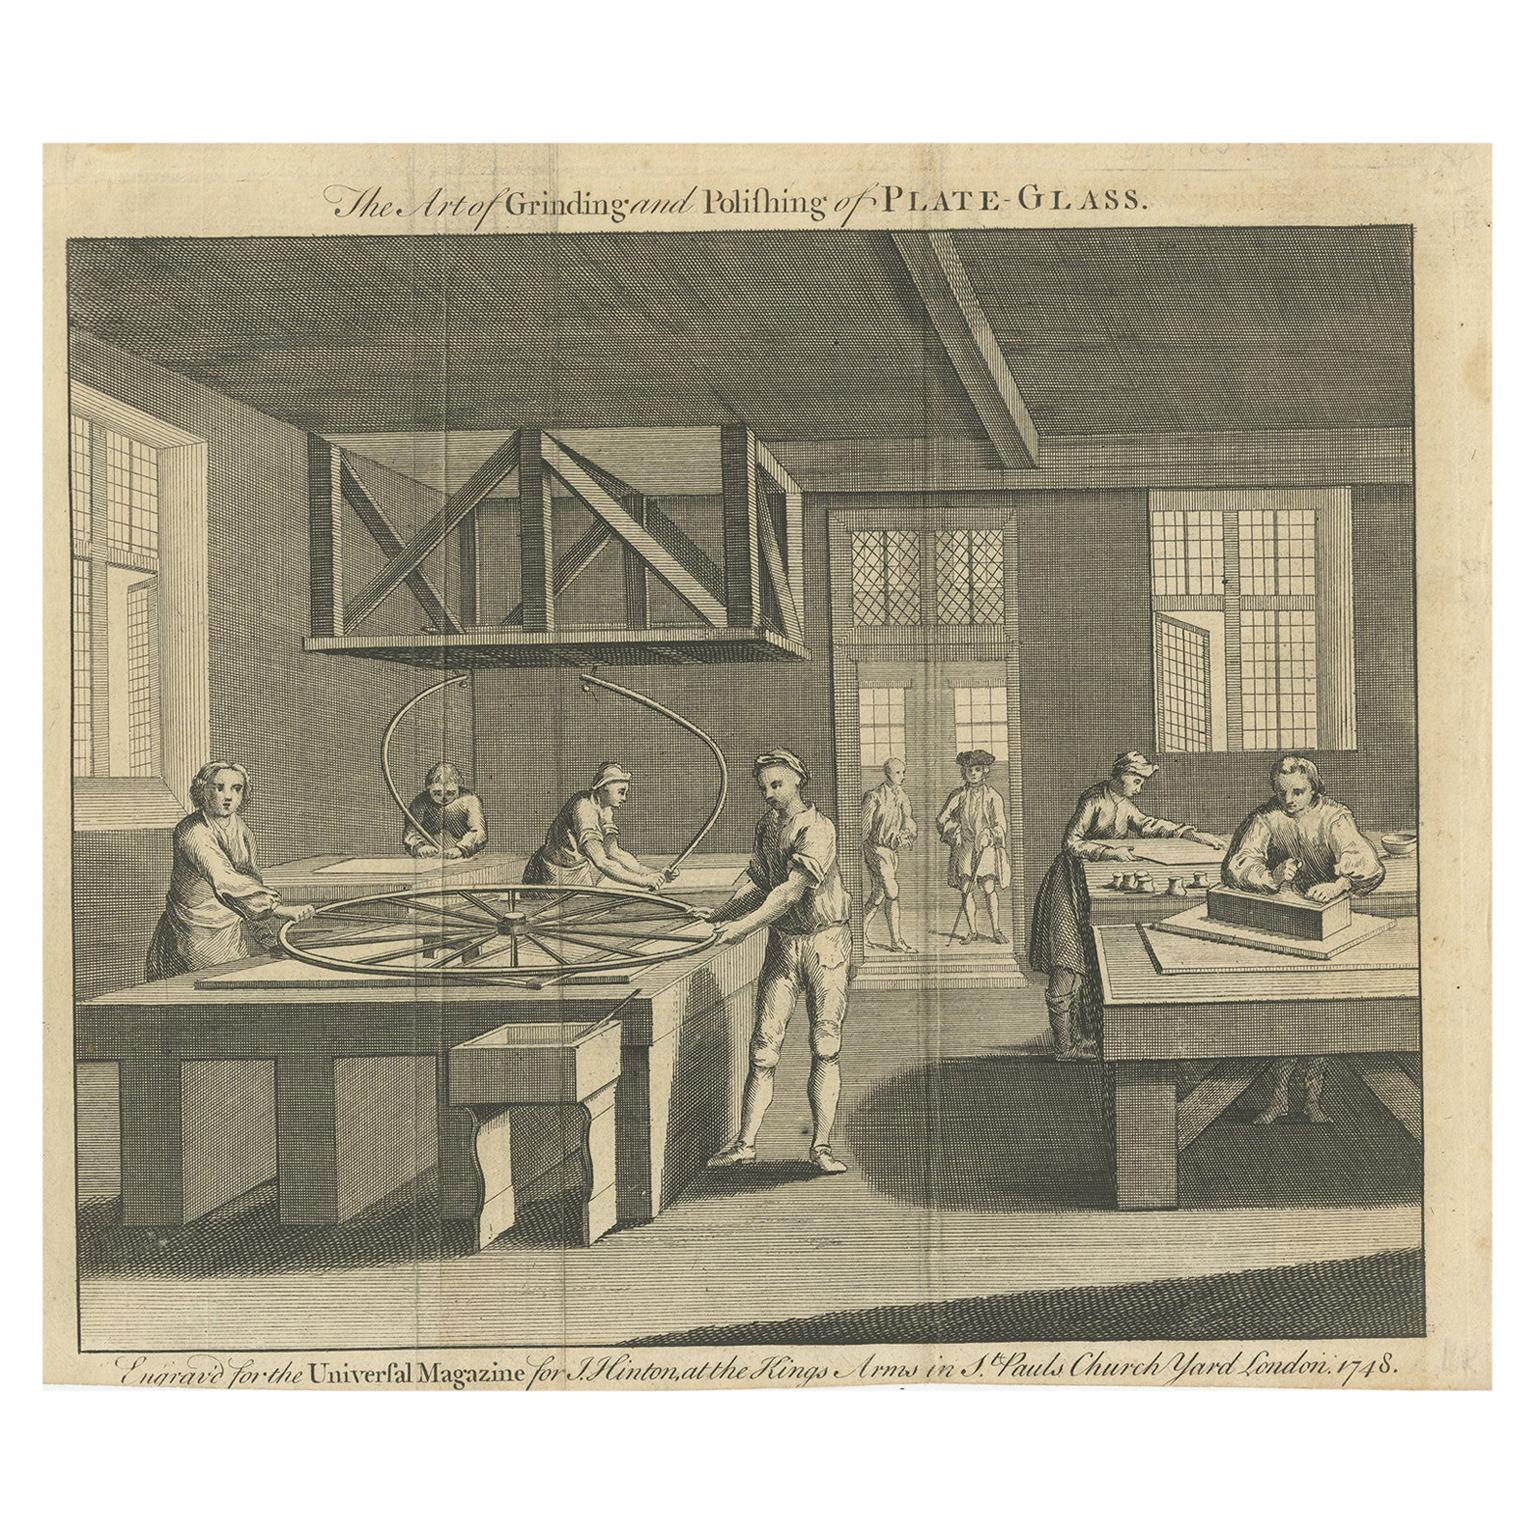 Antique Print of Men Grinding and Polishing Plate Glass by Hinton, 1748